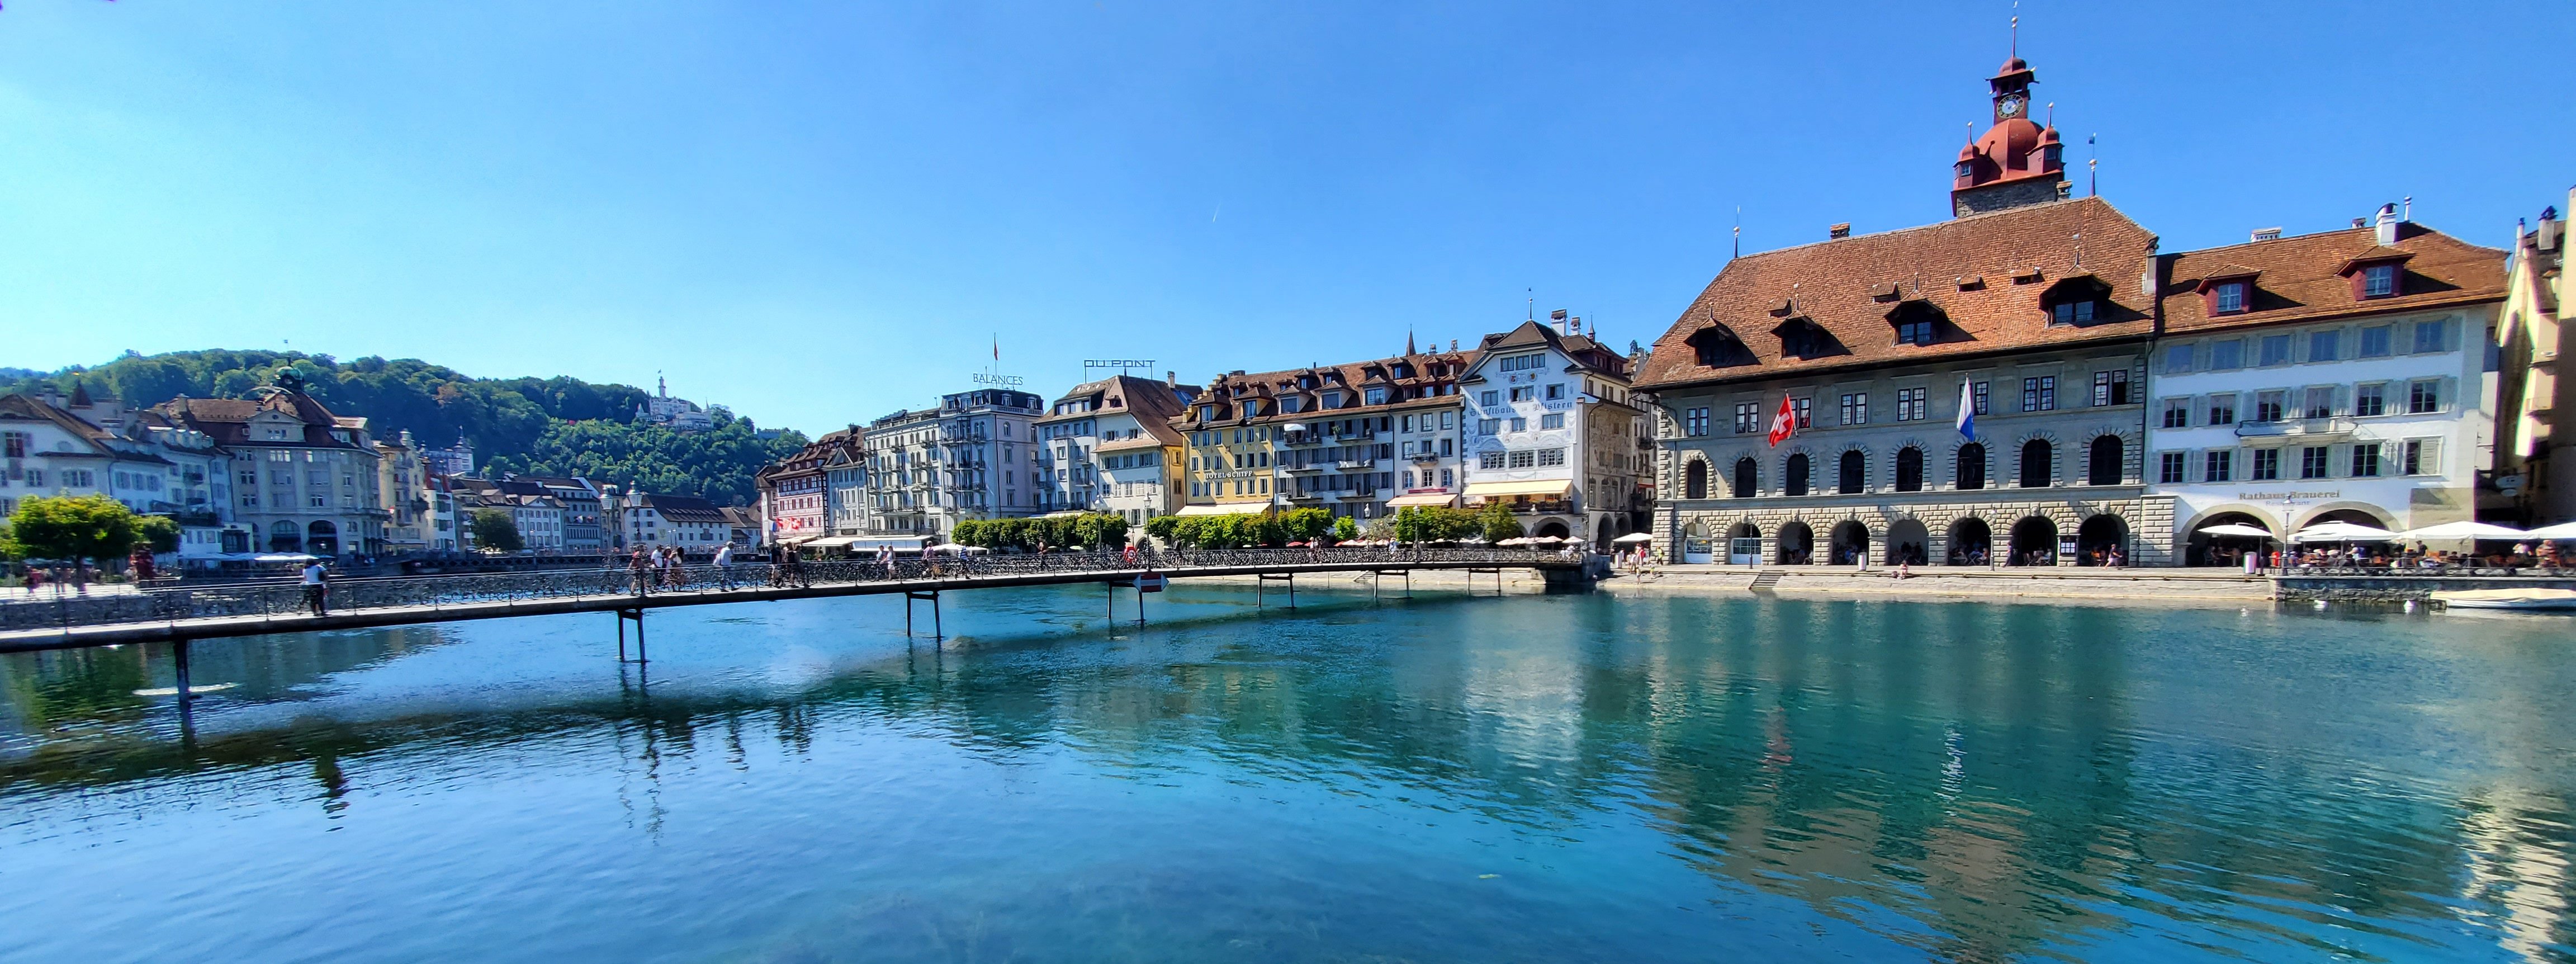 lucerne_bluewaters_large